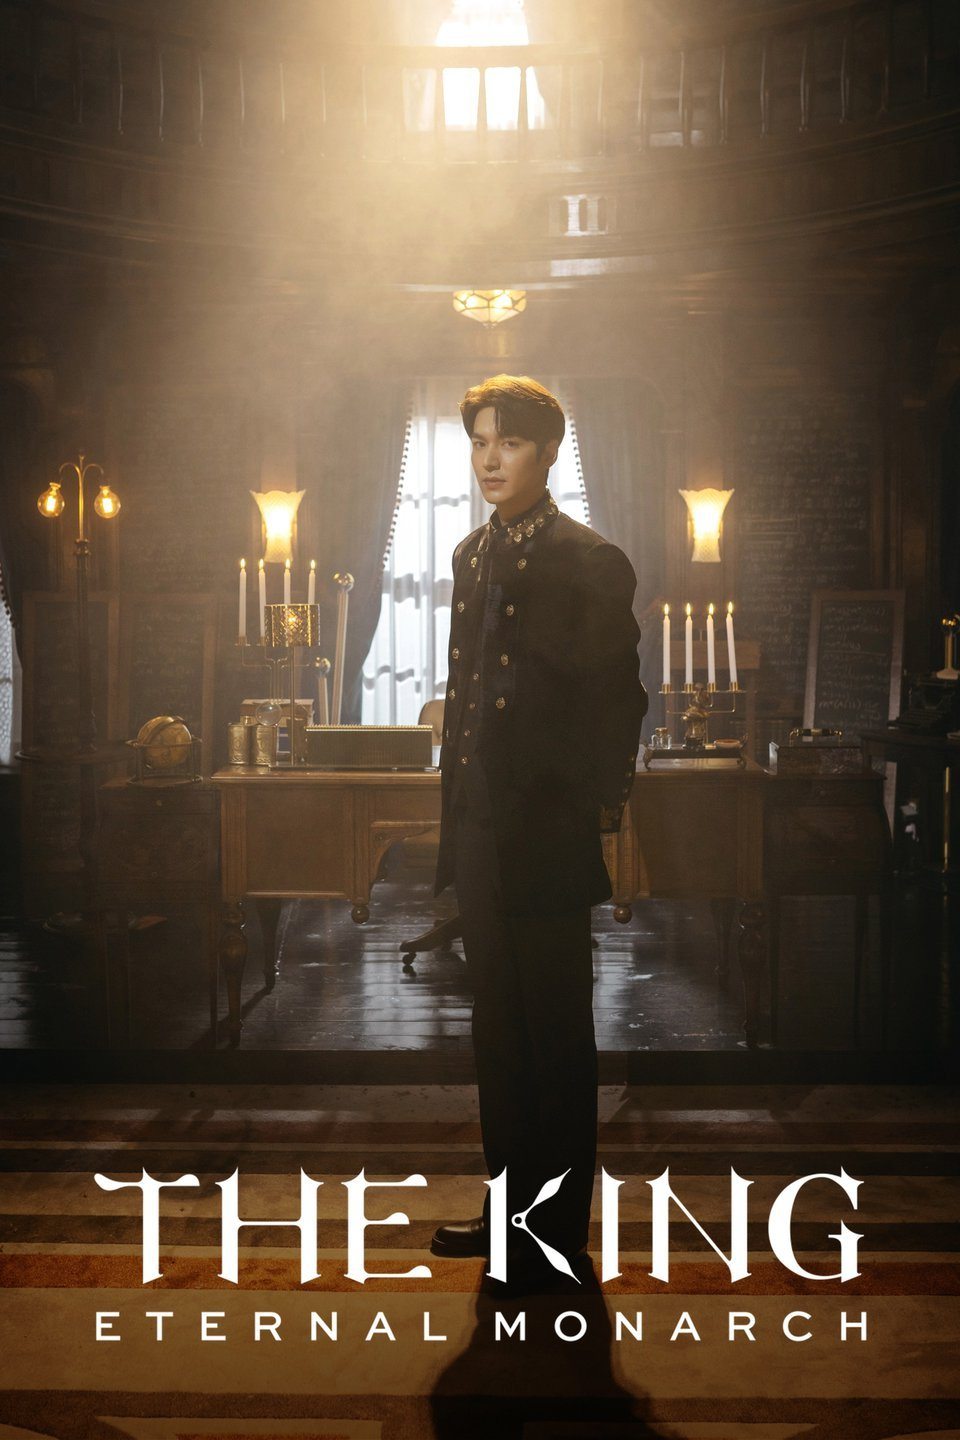 D-day: 'The King Eternal Monarch' starts streaming today - Inquirer Super